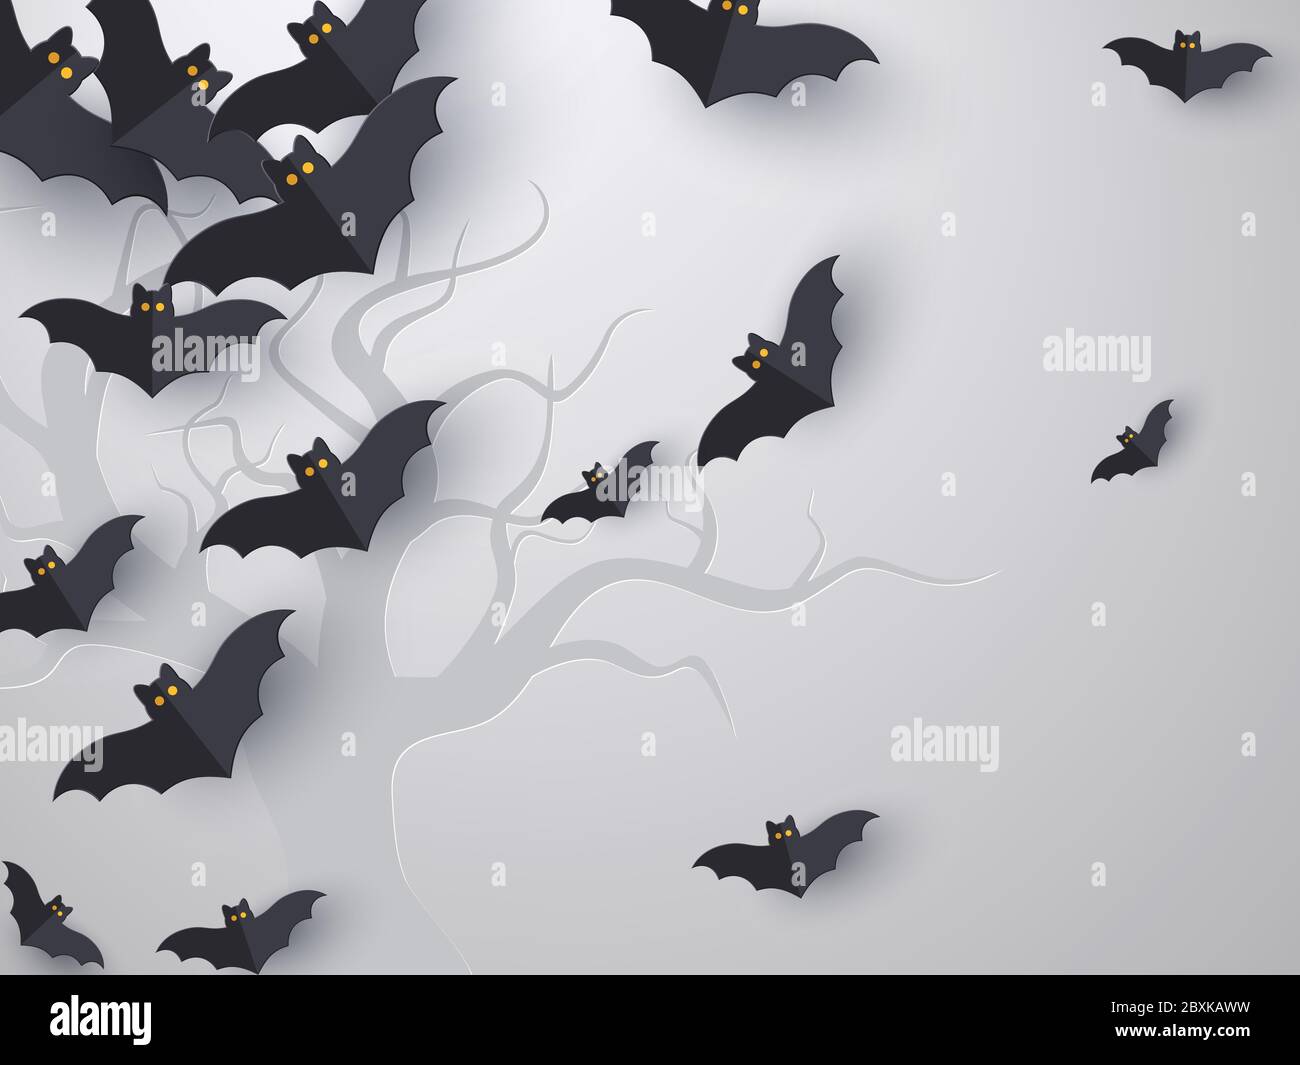 Flying bats background with copy space. Stock Vector